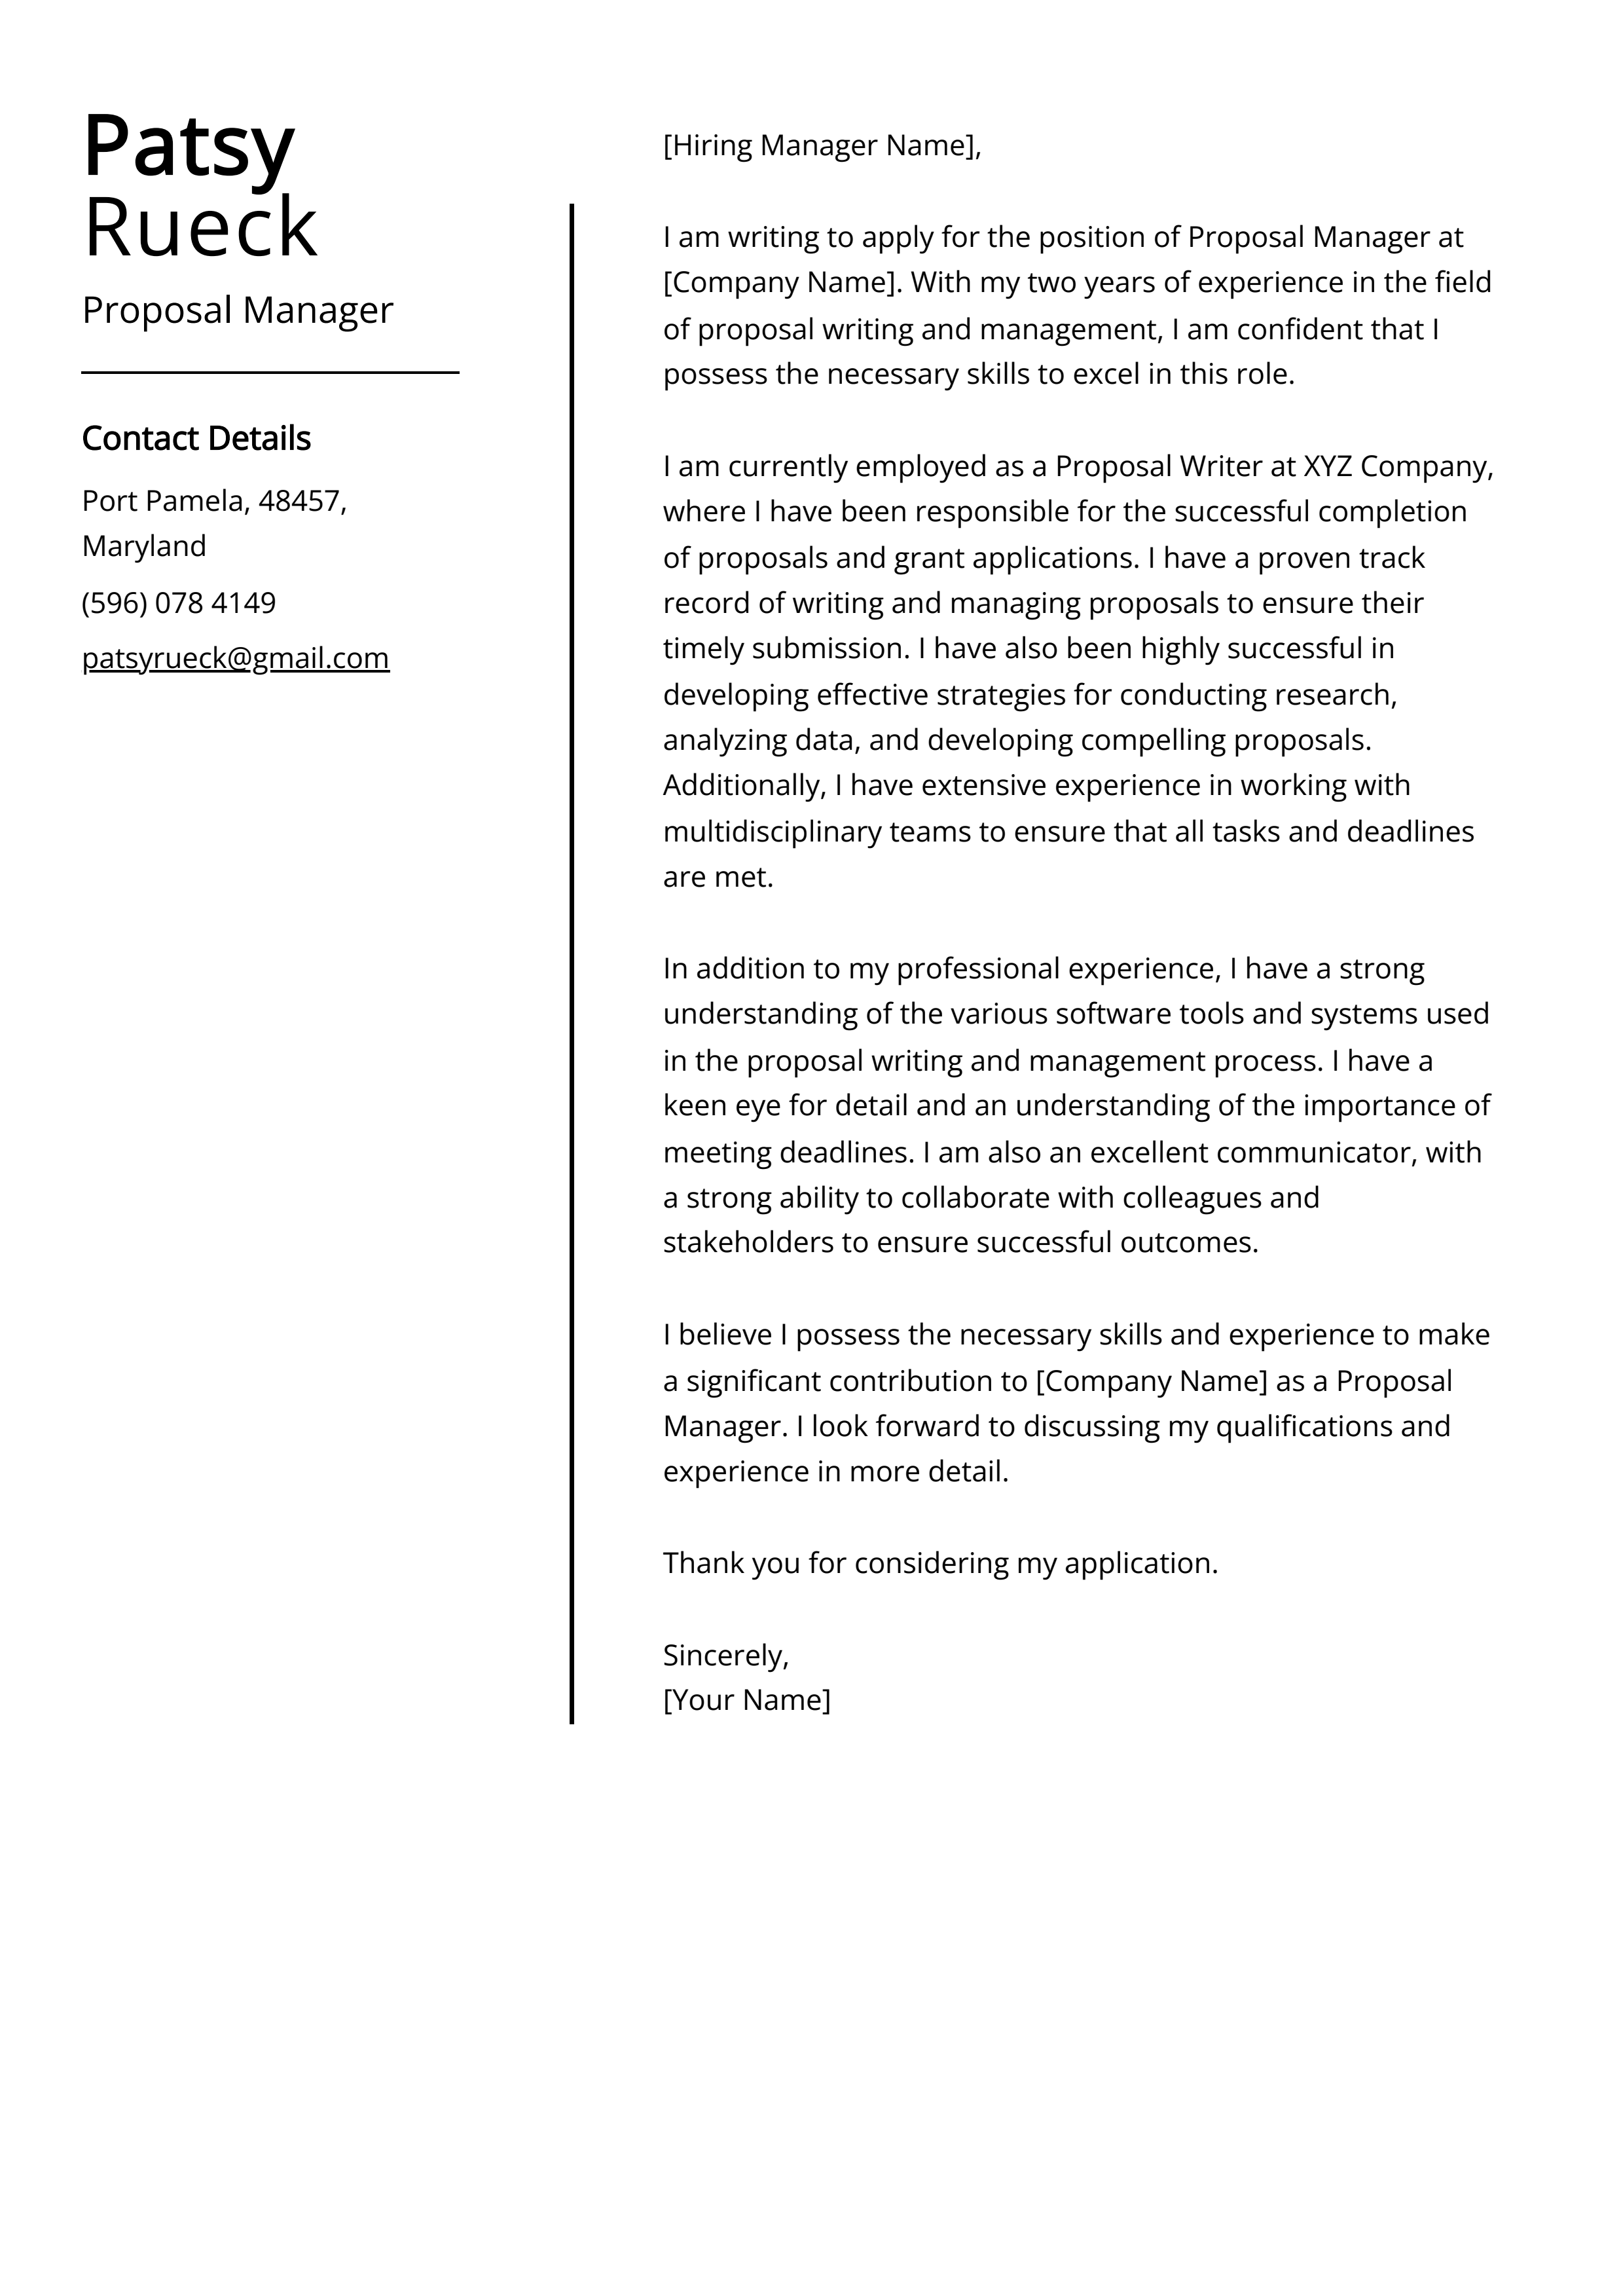 Proposal Manager Cover Letter Example